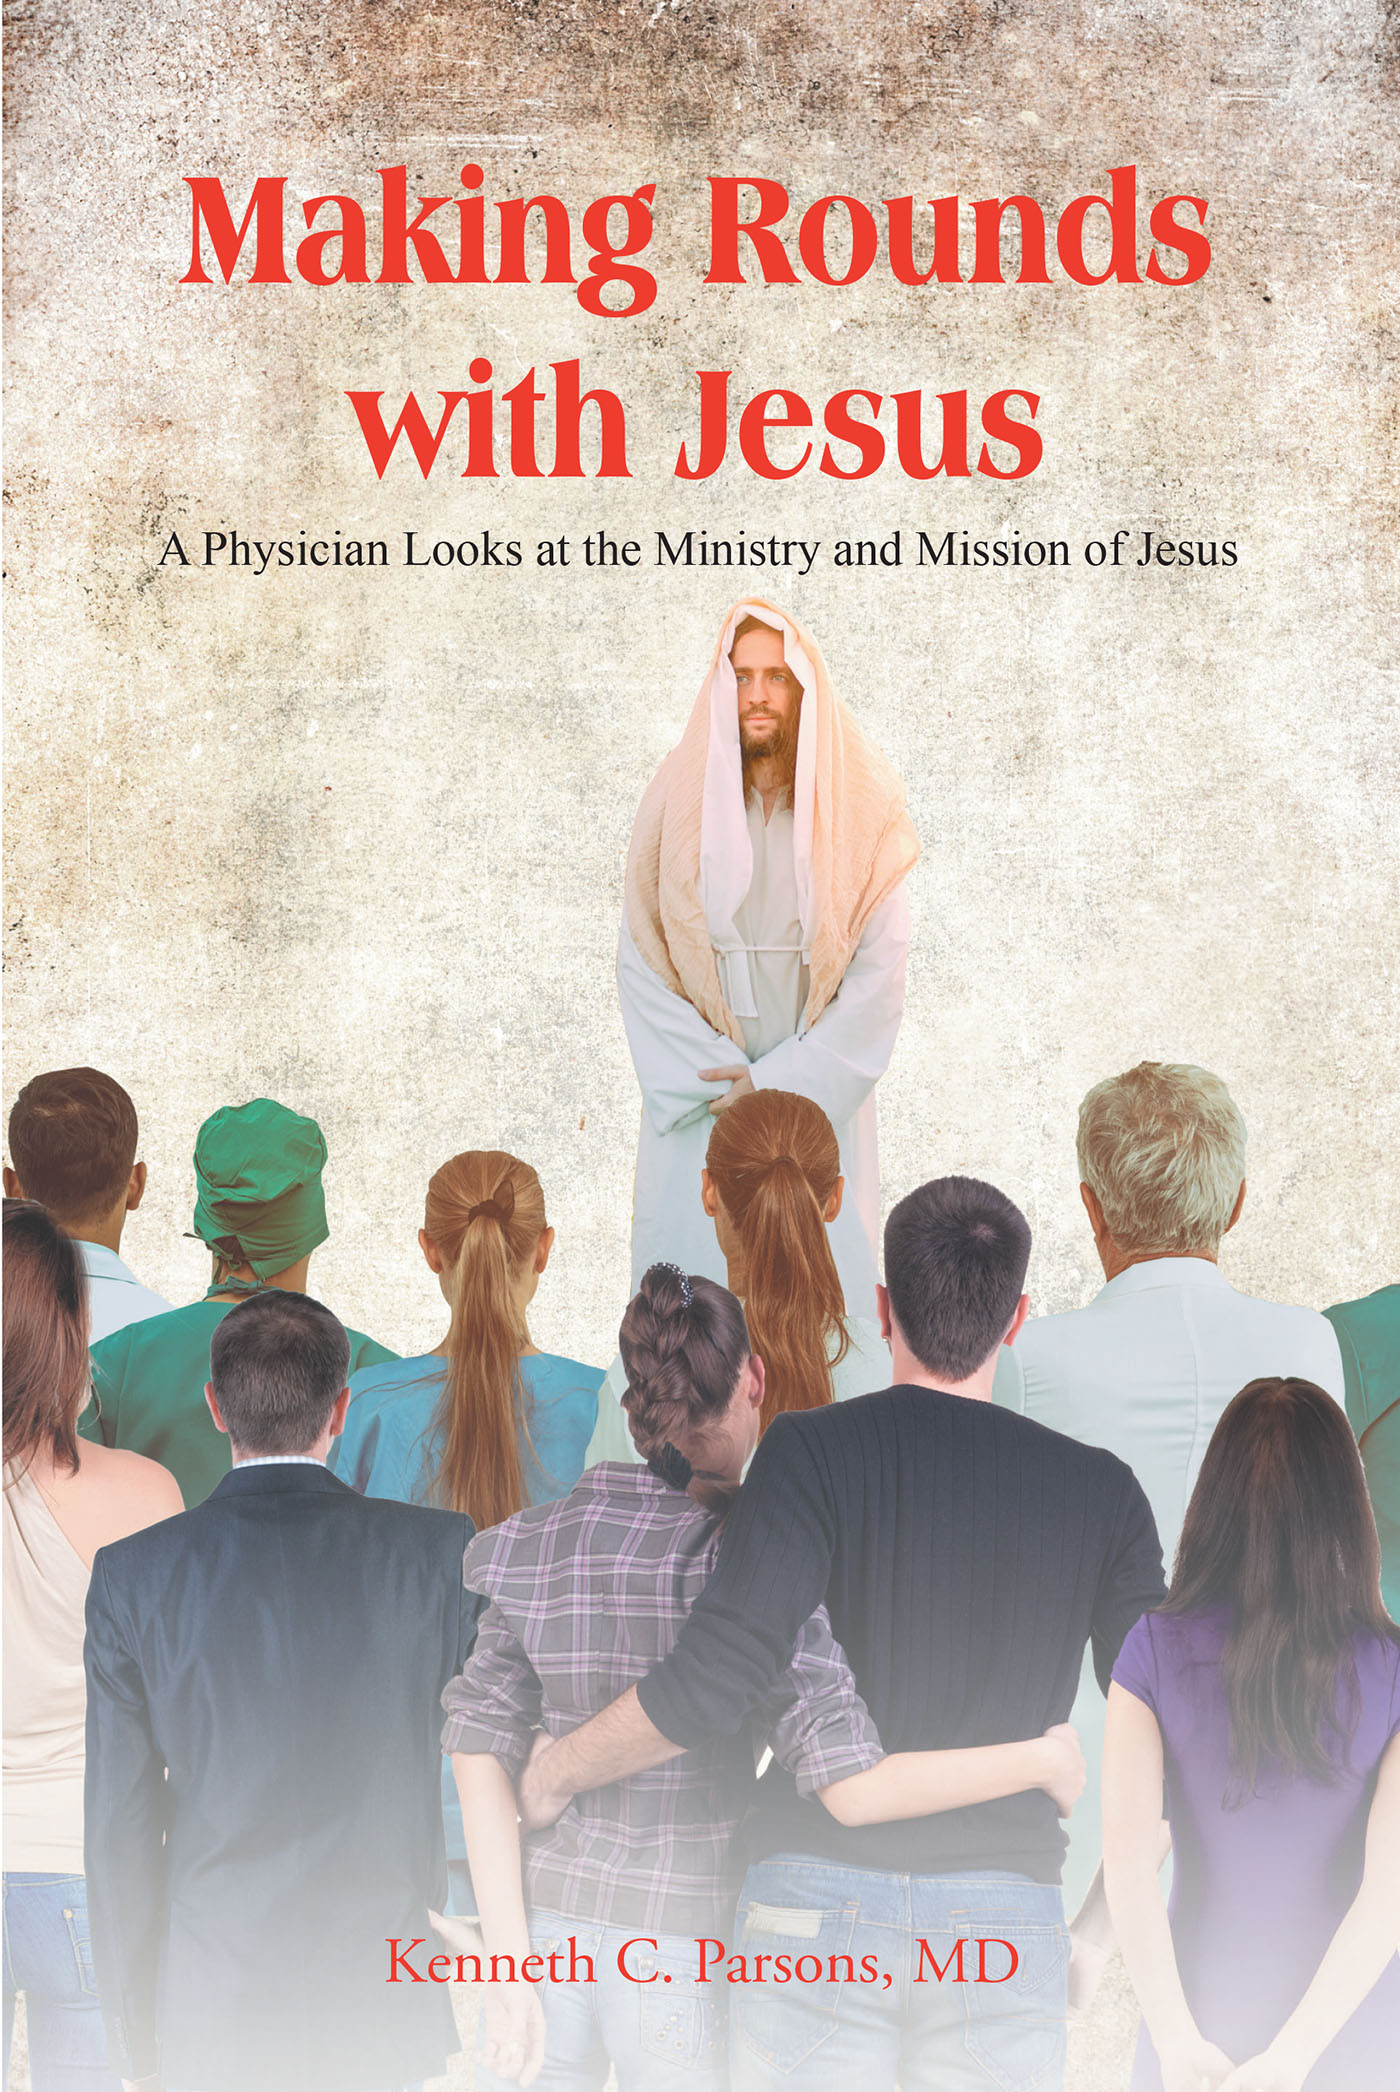 Kenneth C. Parsons, MD’s Newly Released “Making Rounds with Jesus: A Physician Looks at the Ministry and Mission of Jesus” is a Unique Perspective of Jesus’s Life